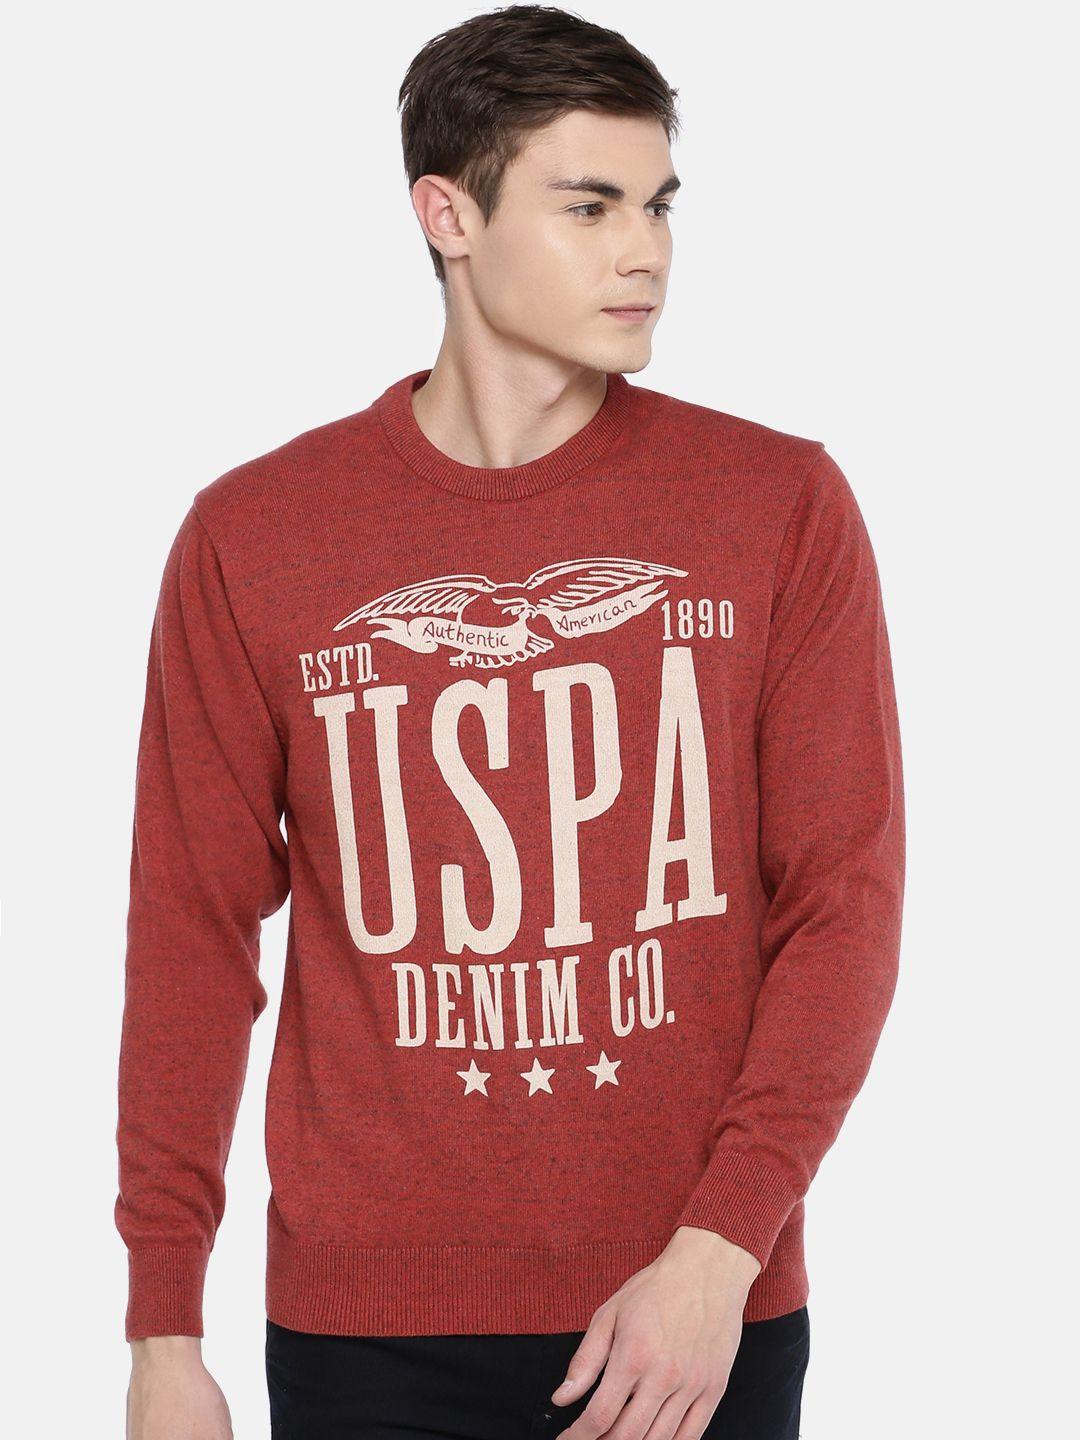 u.s. polo assn. denim co. men rust red printed pullover sweater